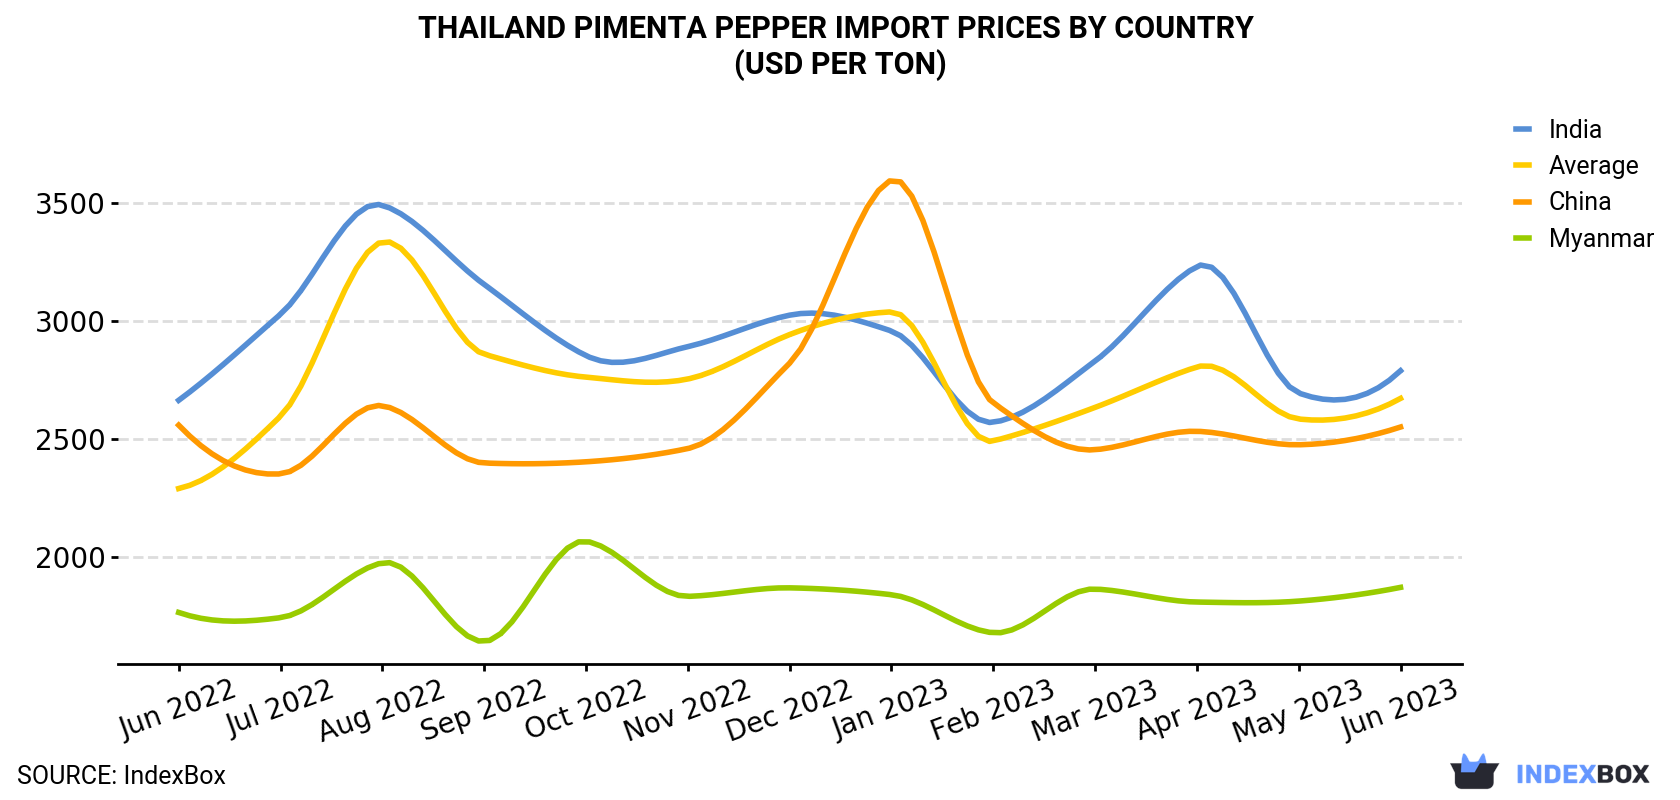 Thailand Pimenta Pepper Import Prices By Country (USD Per Ton)